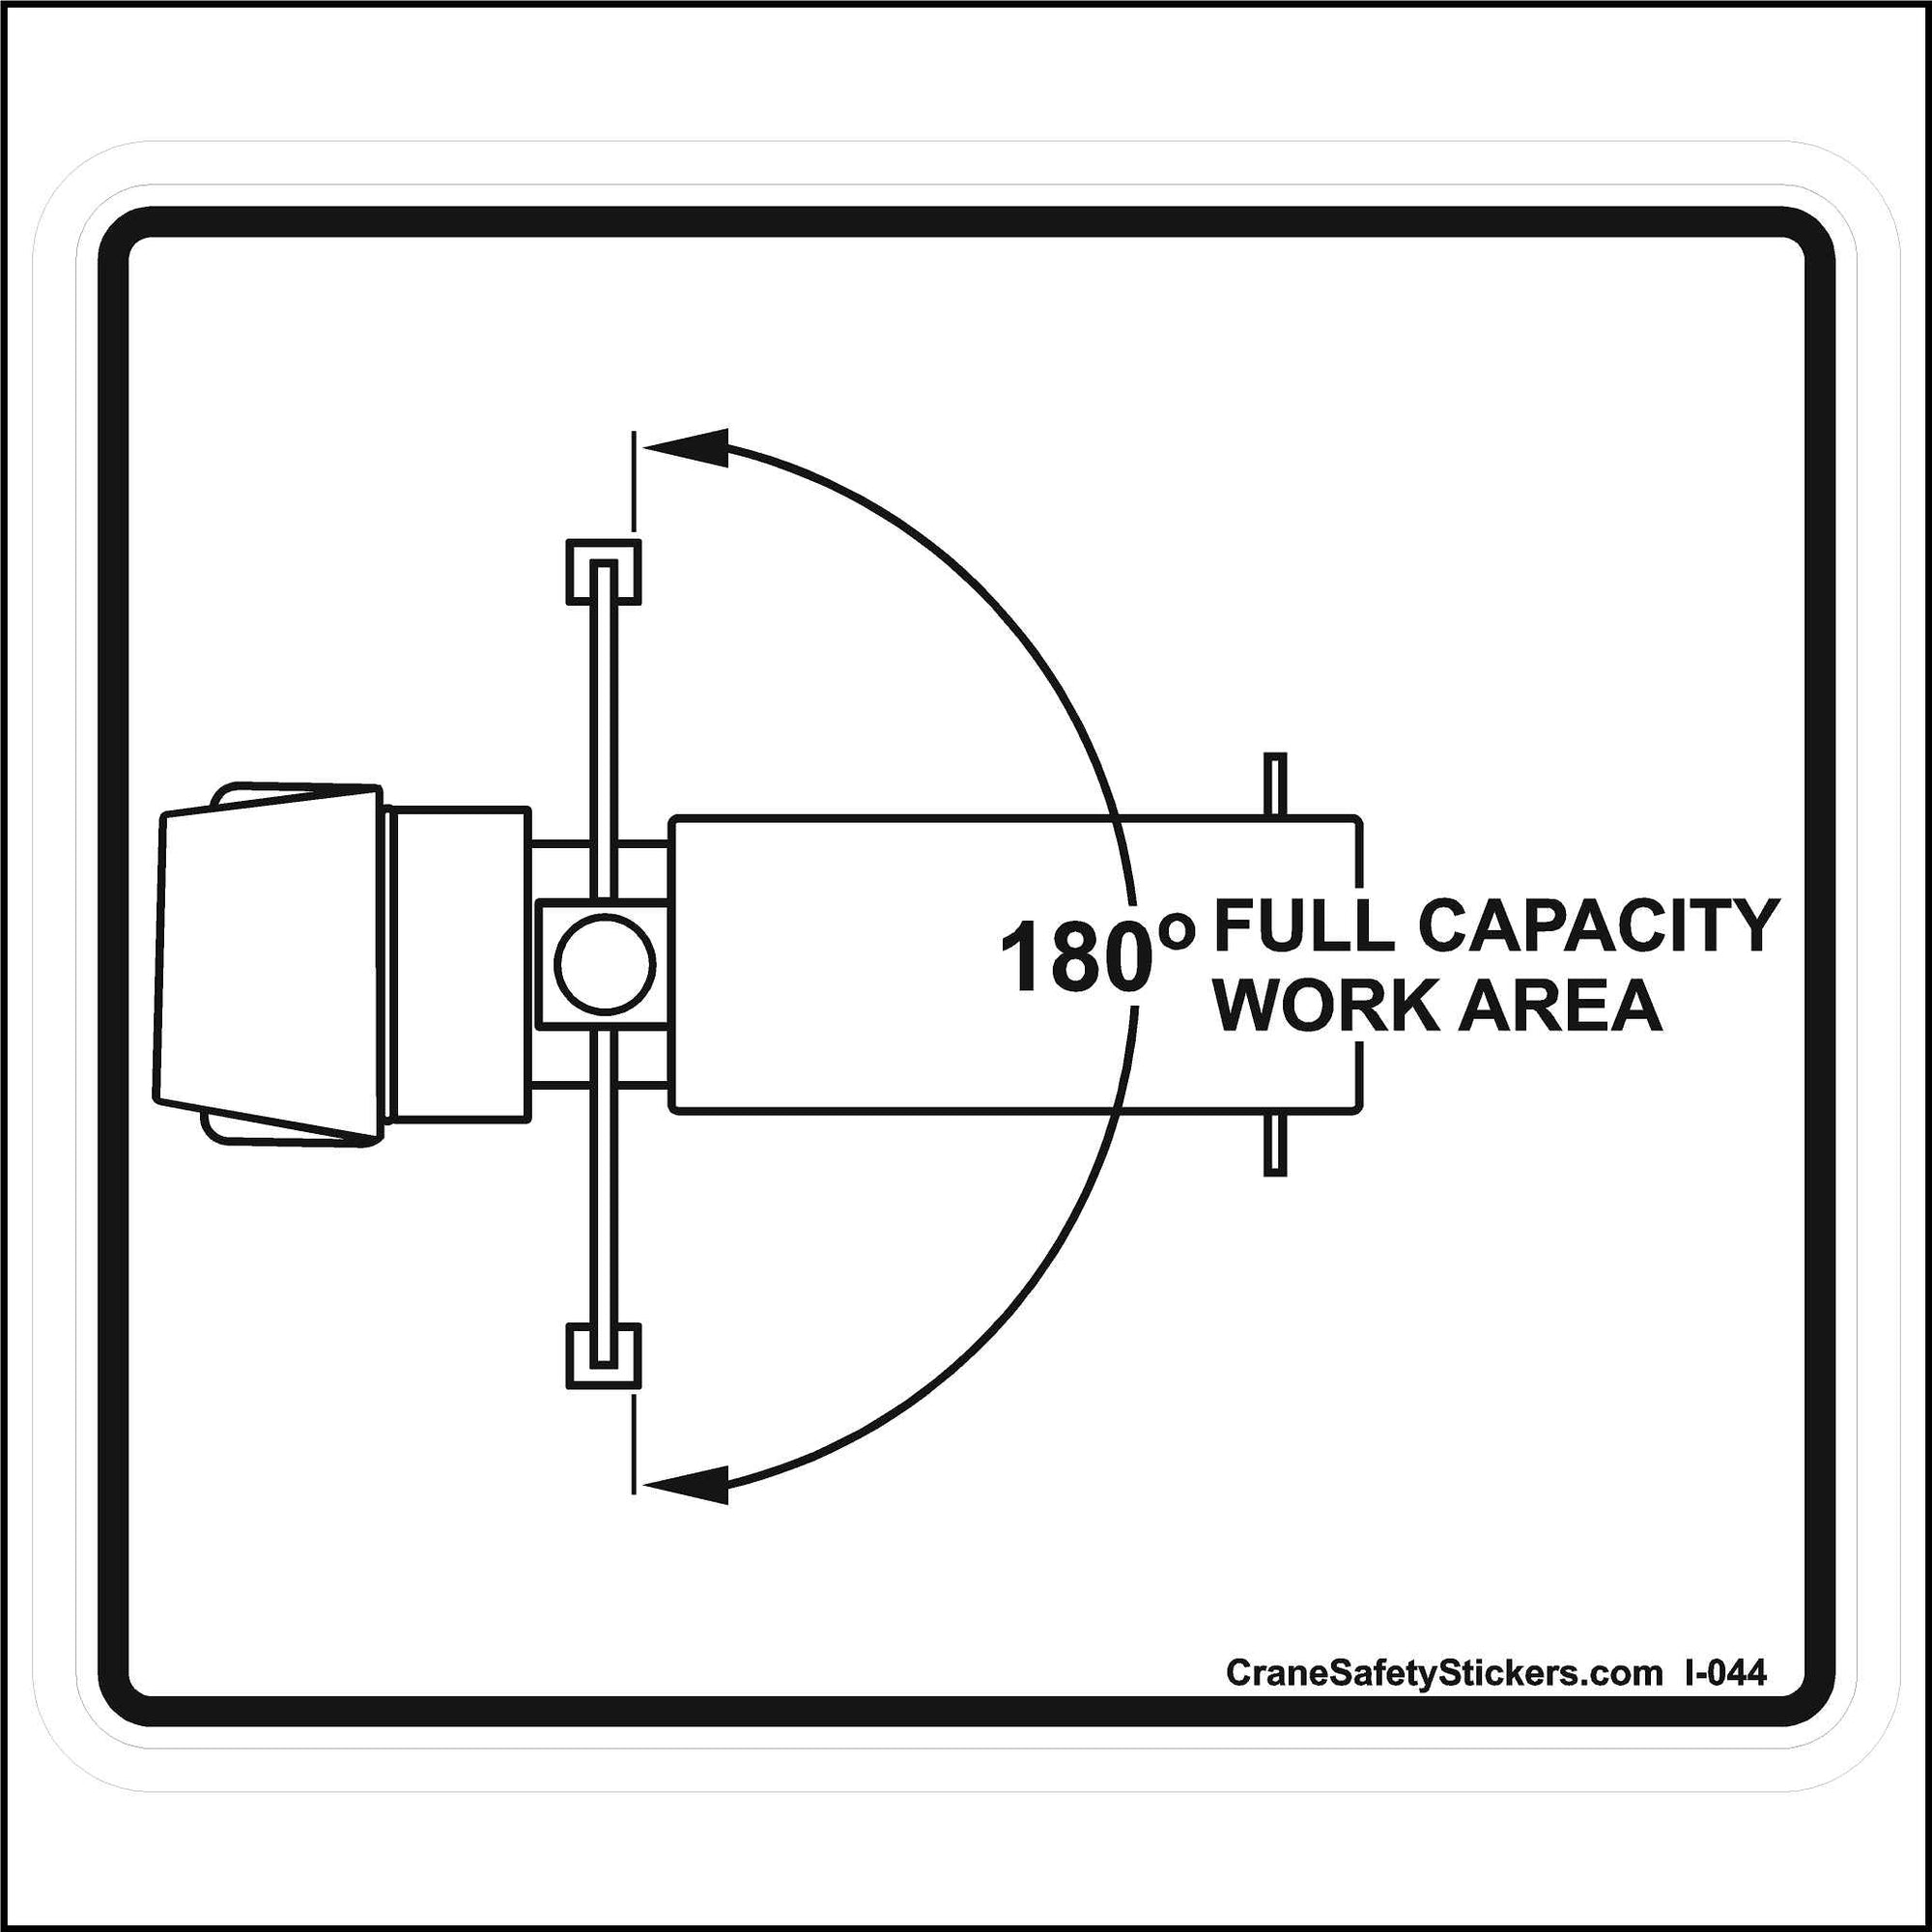 180 Degree Full Capacity Work Area Sticker for a National 500C National 560C Boom Truck.